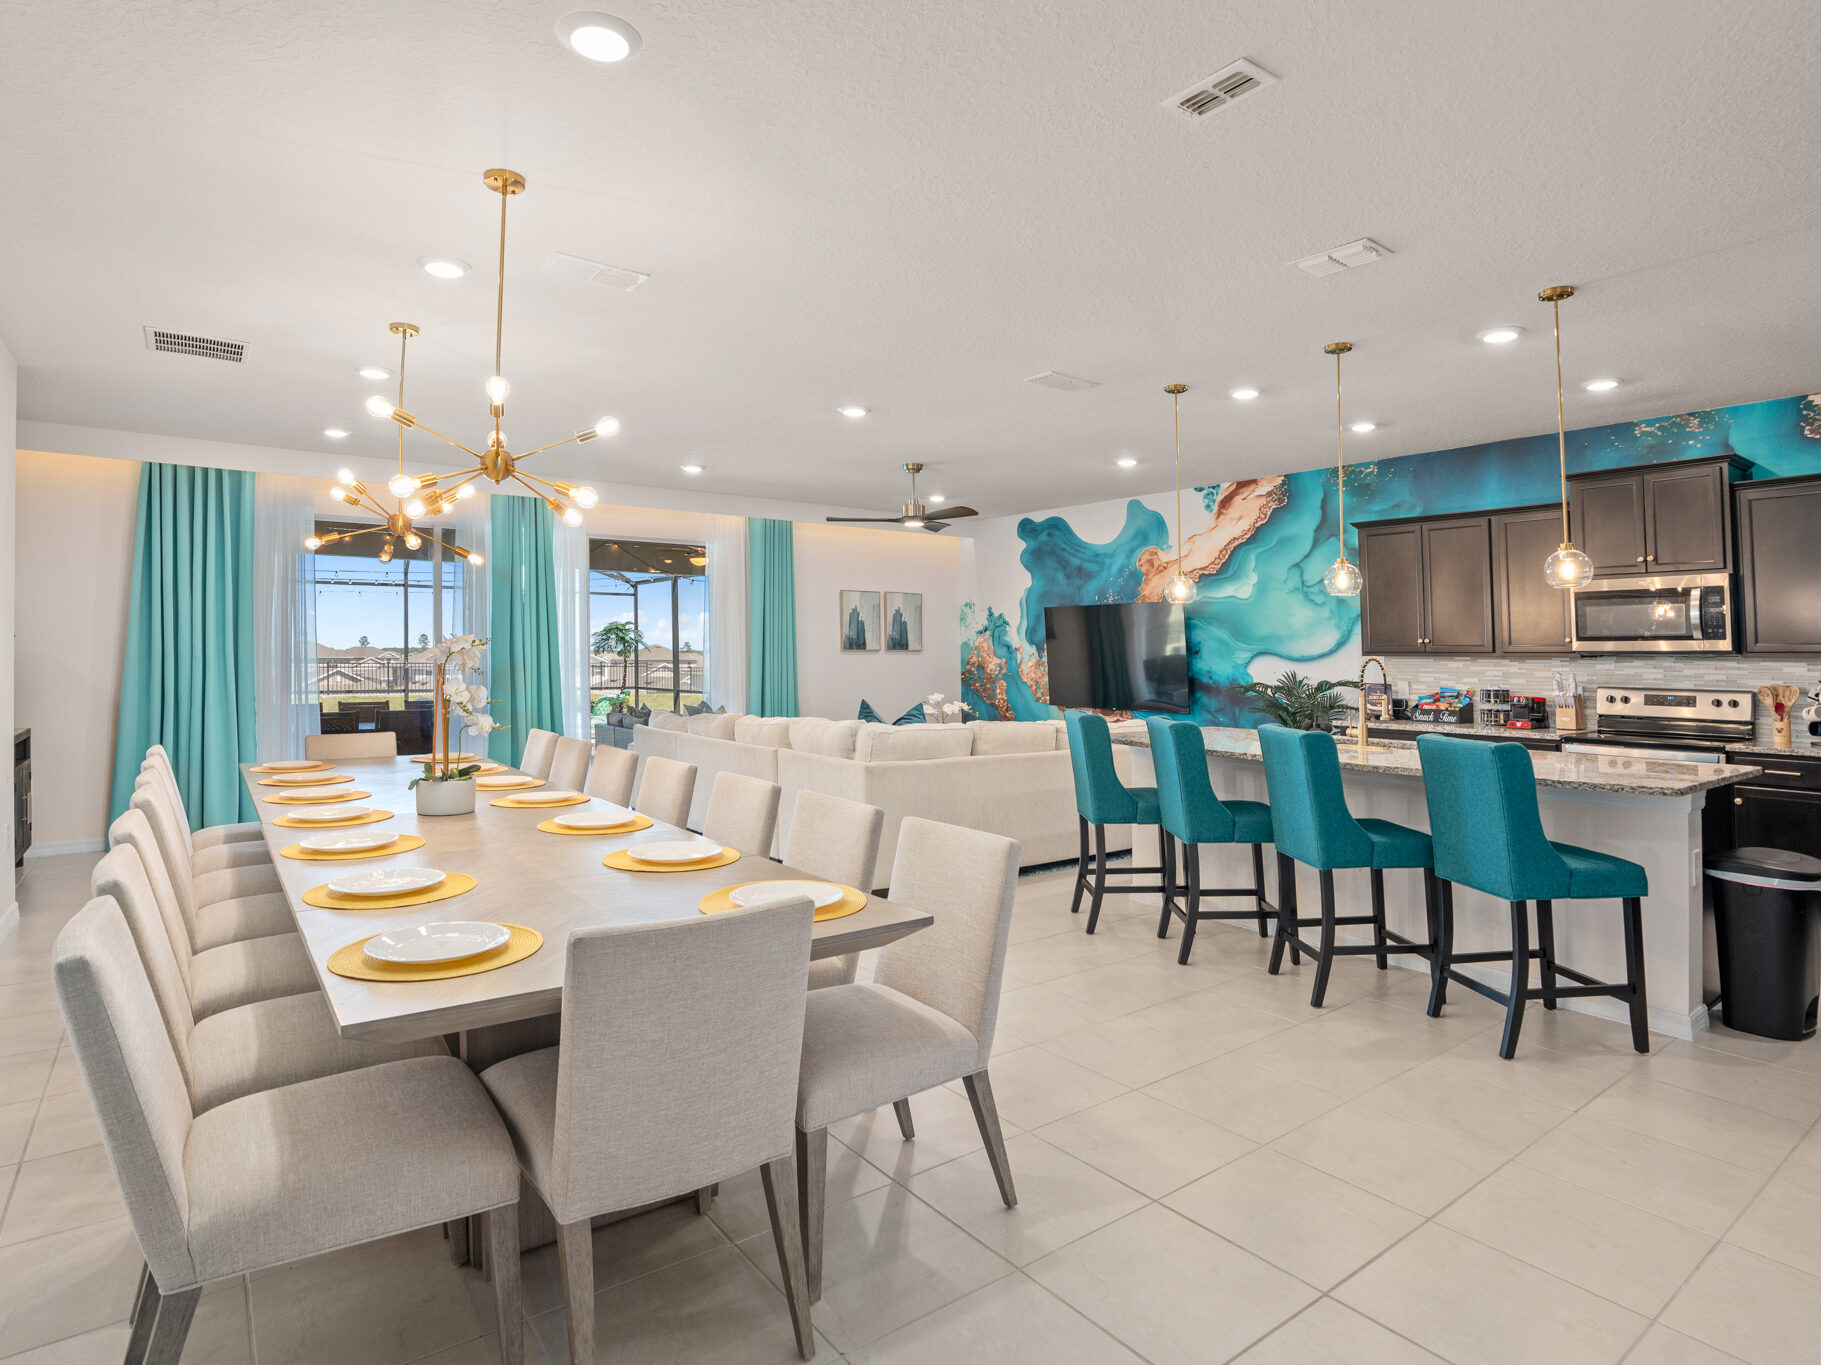 Luxury airbnb short term rental vacation home designed by Magic Interiors Orlando